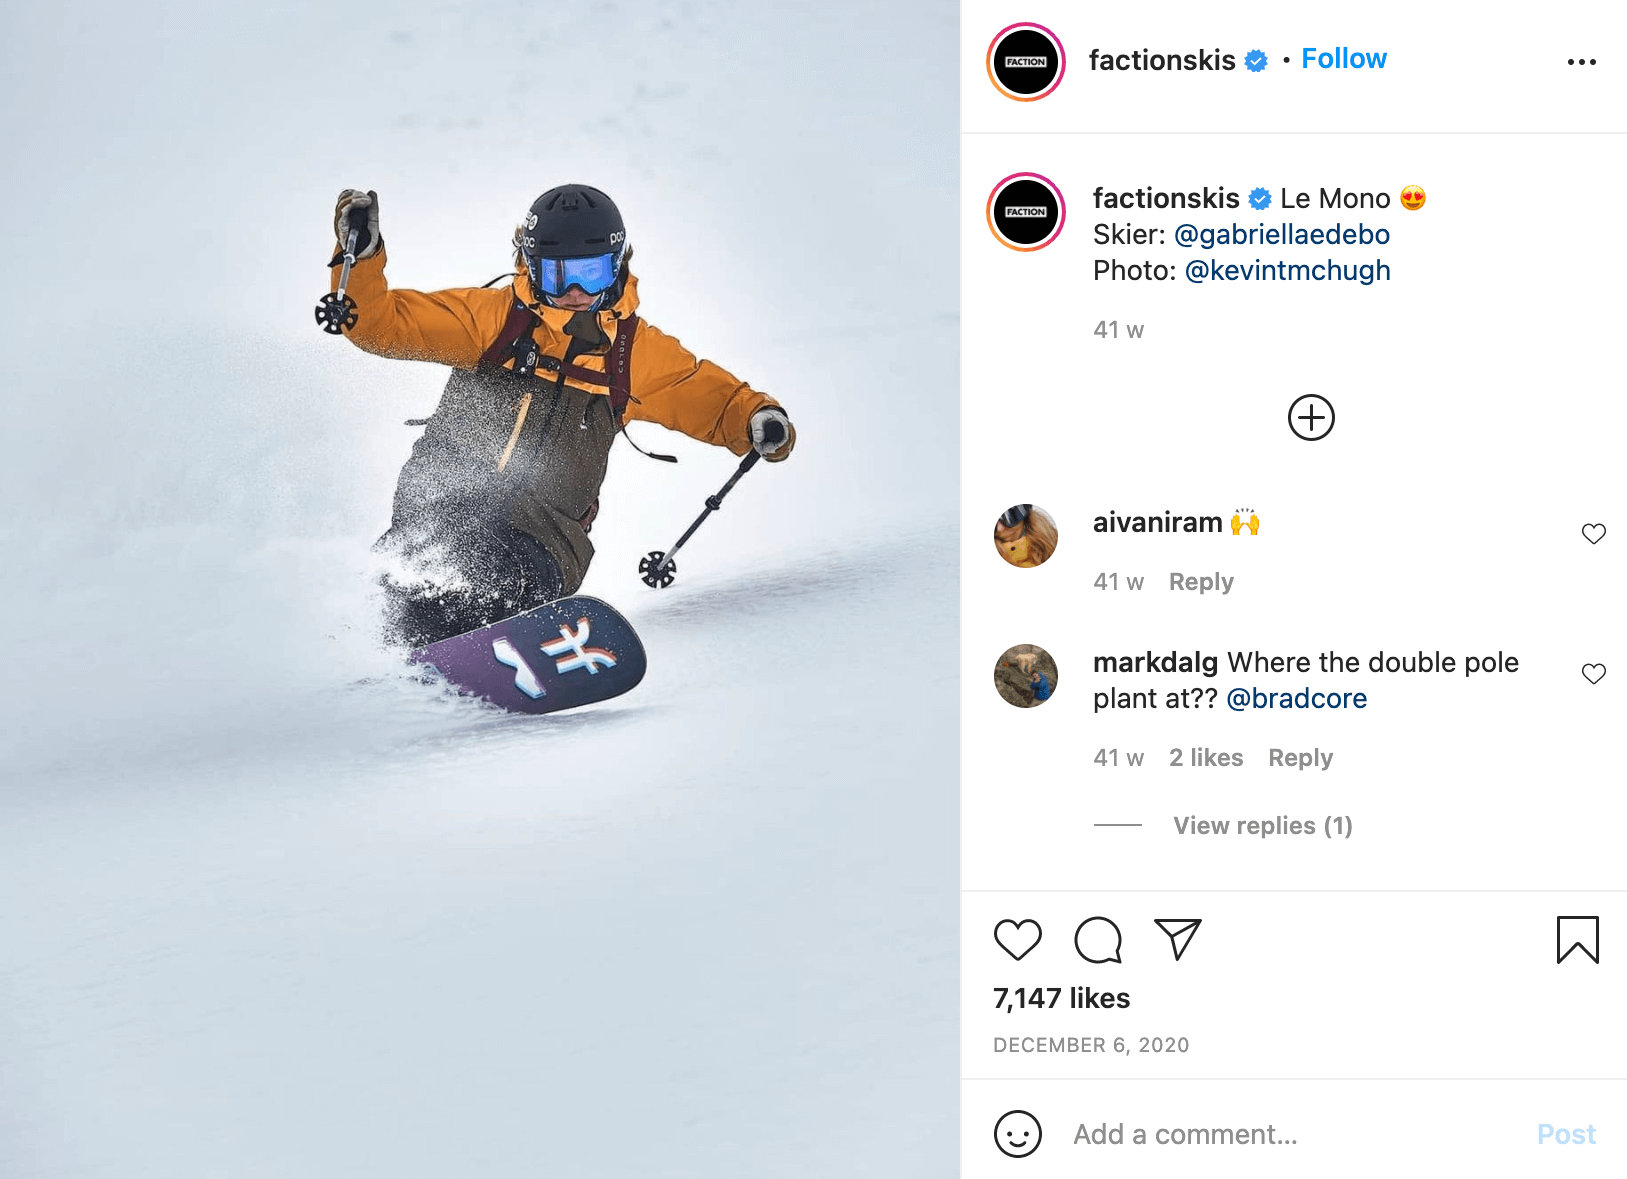 User Generated Content of Man Skiing Using Faction Products